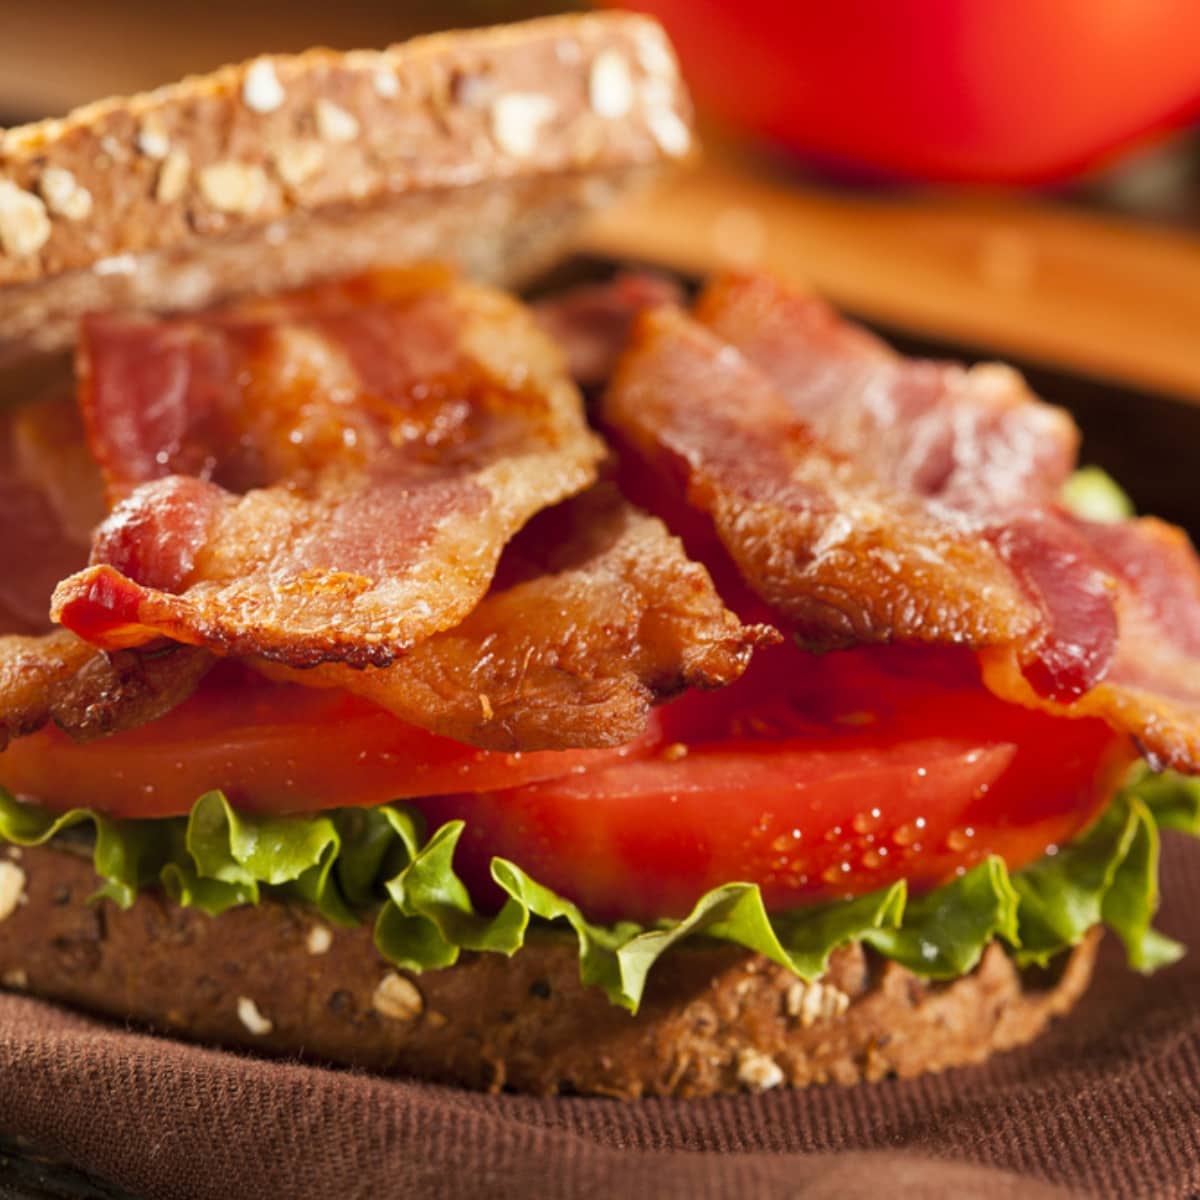 BLT Sandwich with Baked Bacon, Wheat Bread, Lettuce, and Tomatoes